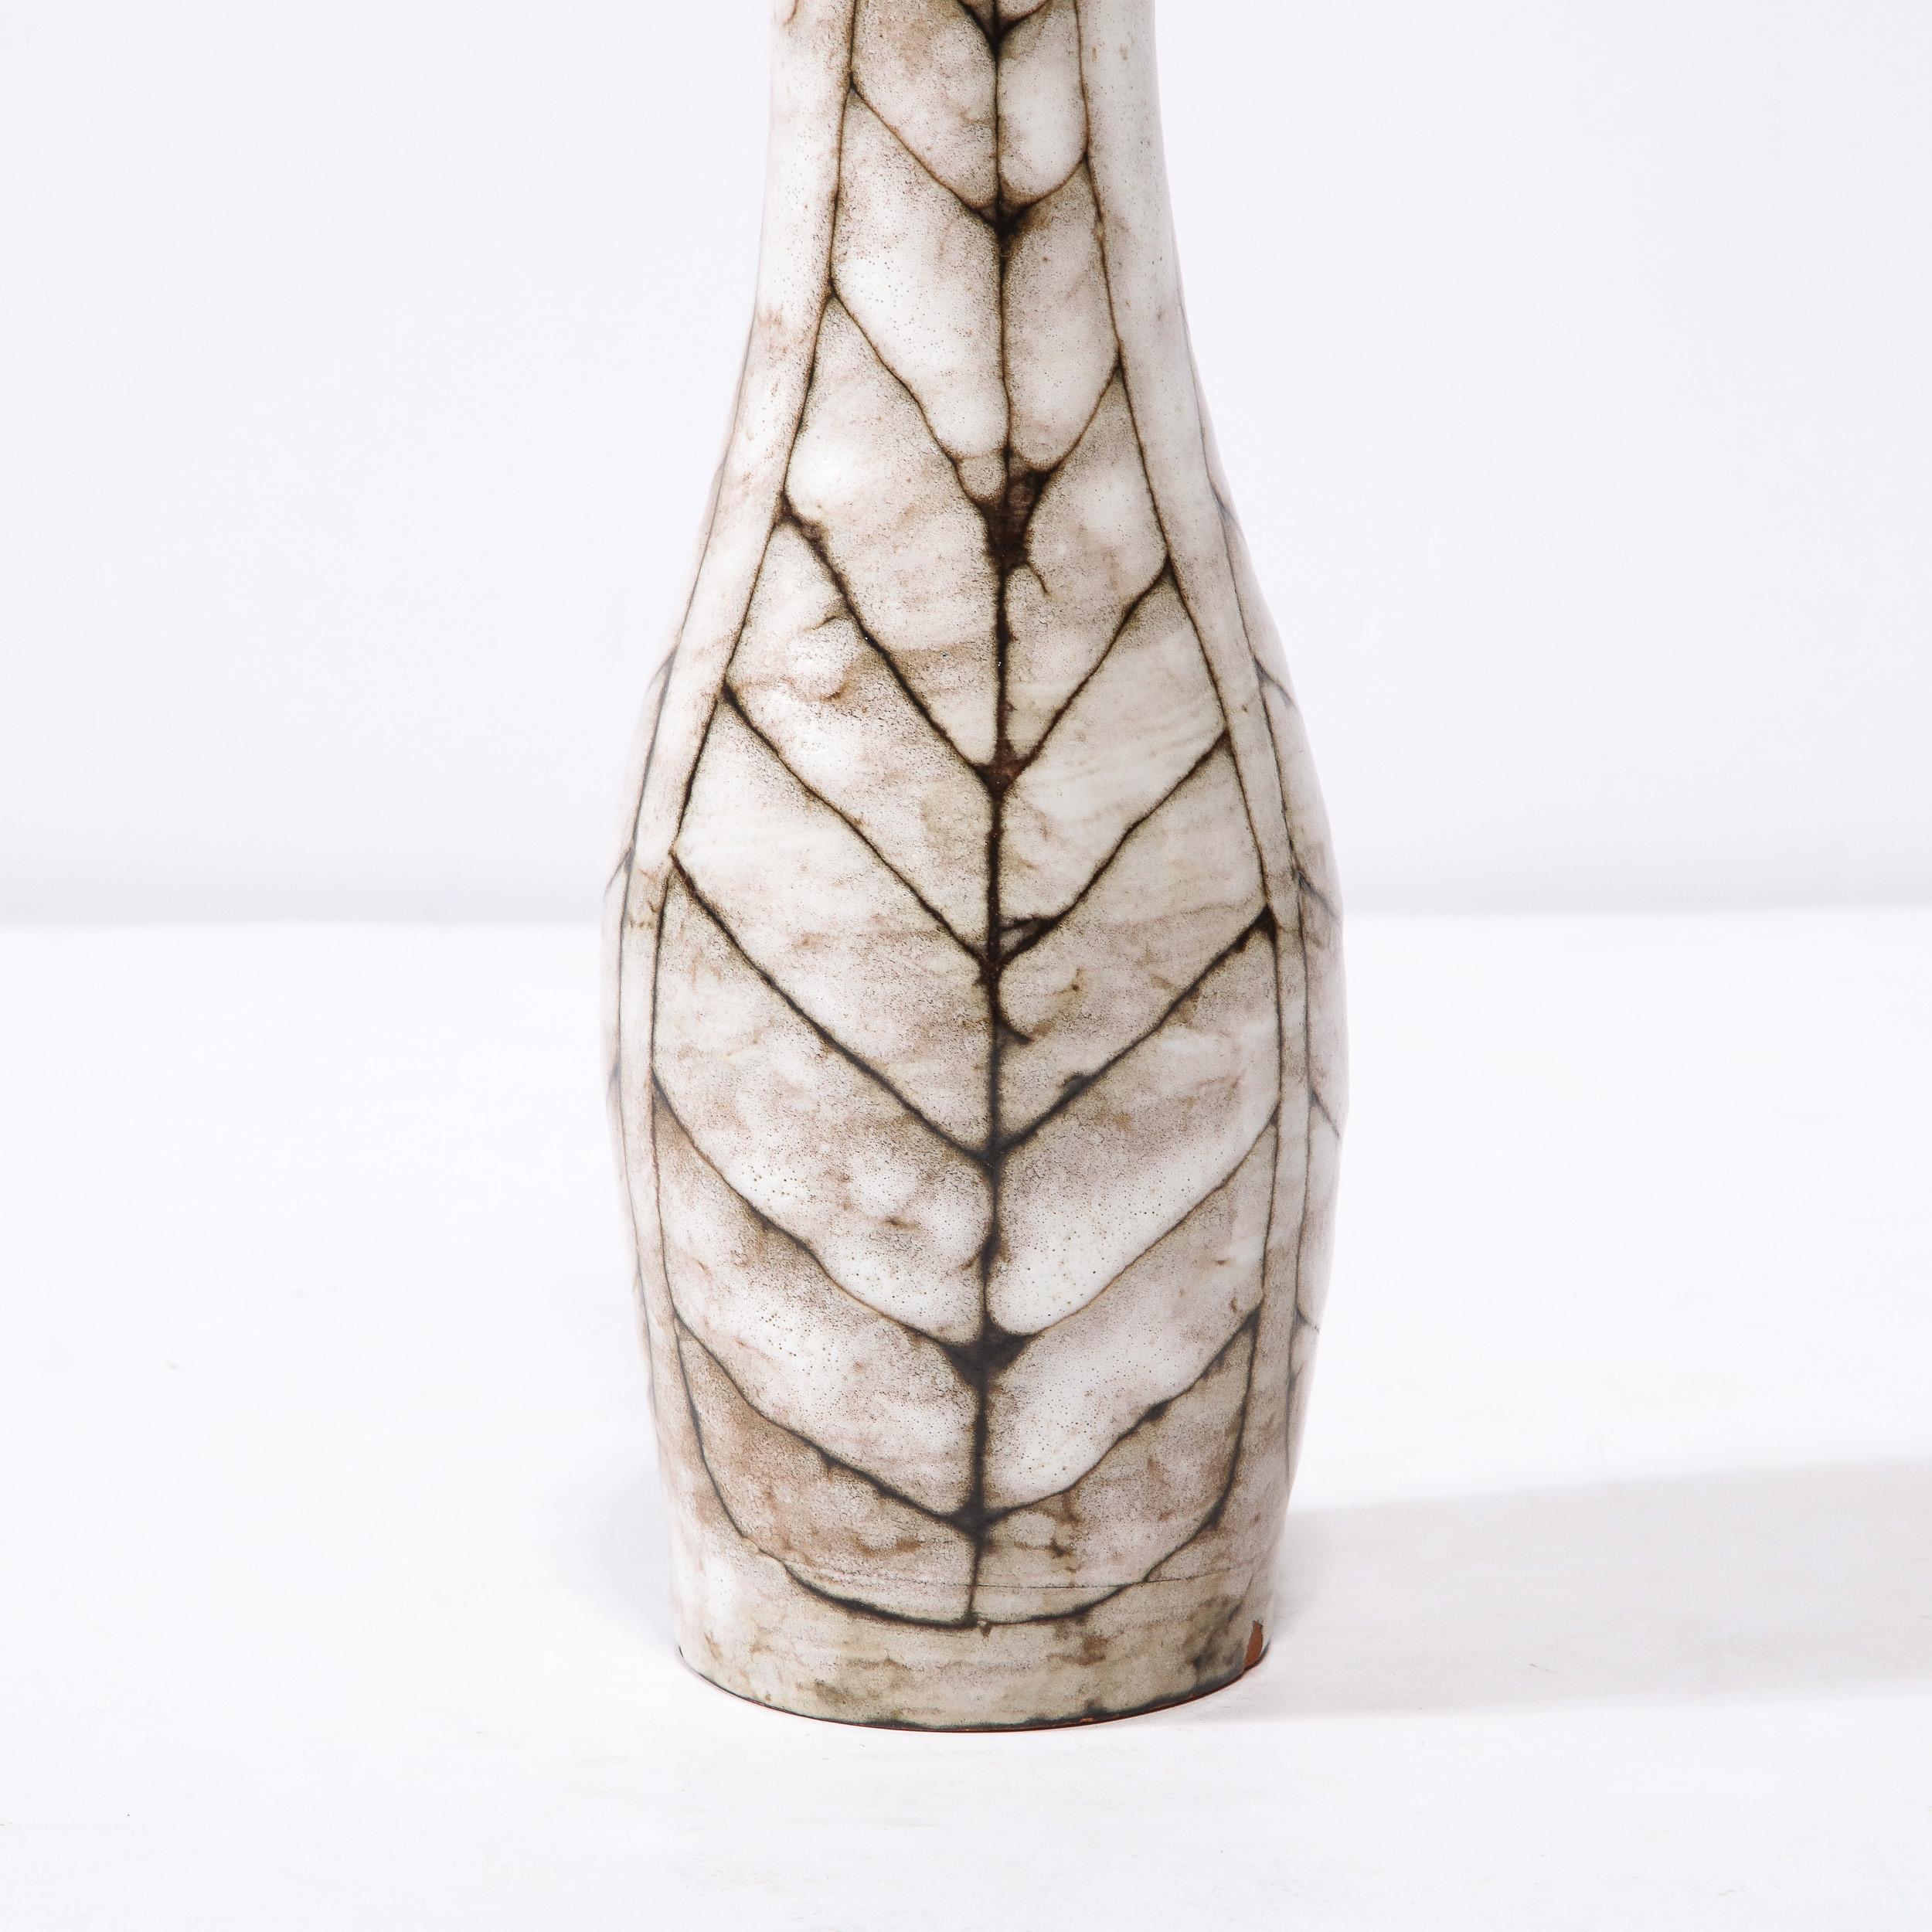 Hungarian Mid-Century Modernist White and Earth Toned Tapered Ceramic Vase w/ Leaf Motif  For Sale